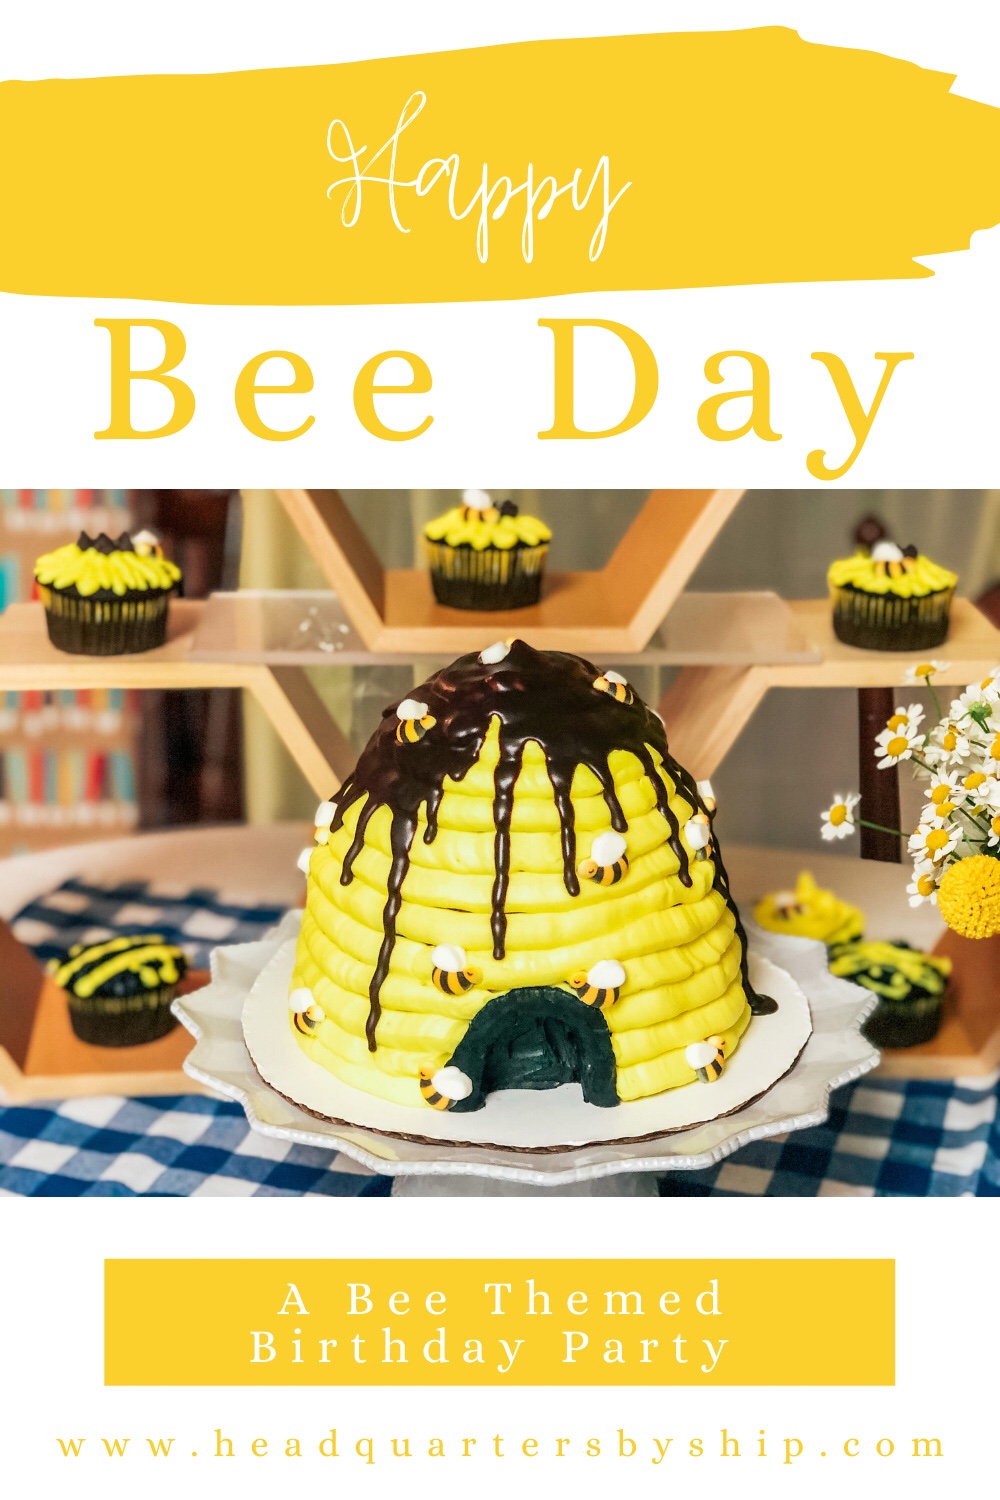 Kara's Party Ideas Bee Party Planning Ideas Supplies Idea Cake Decorations  Beehive